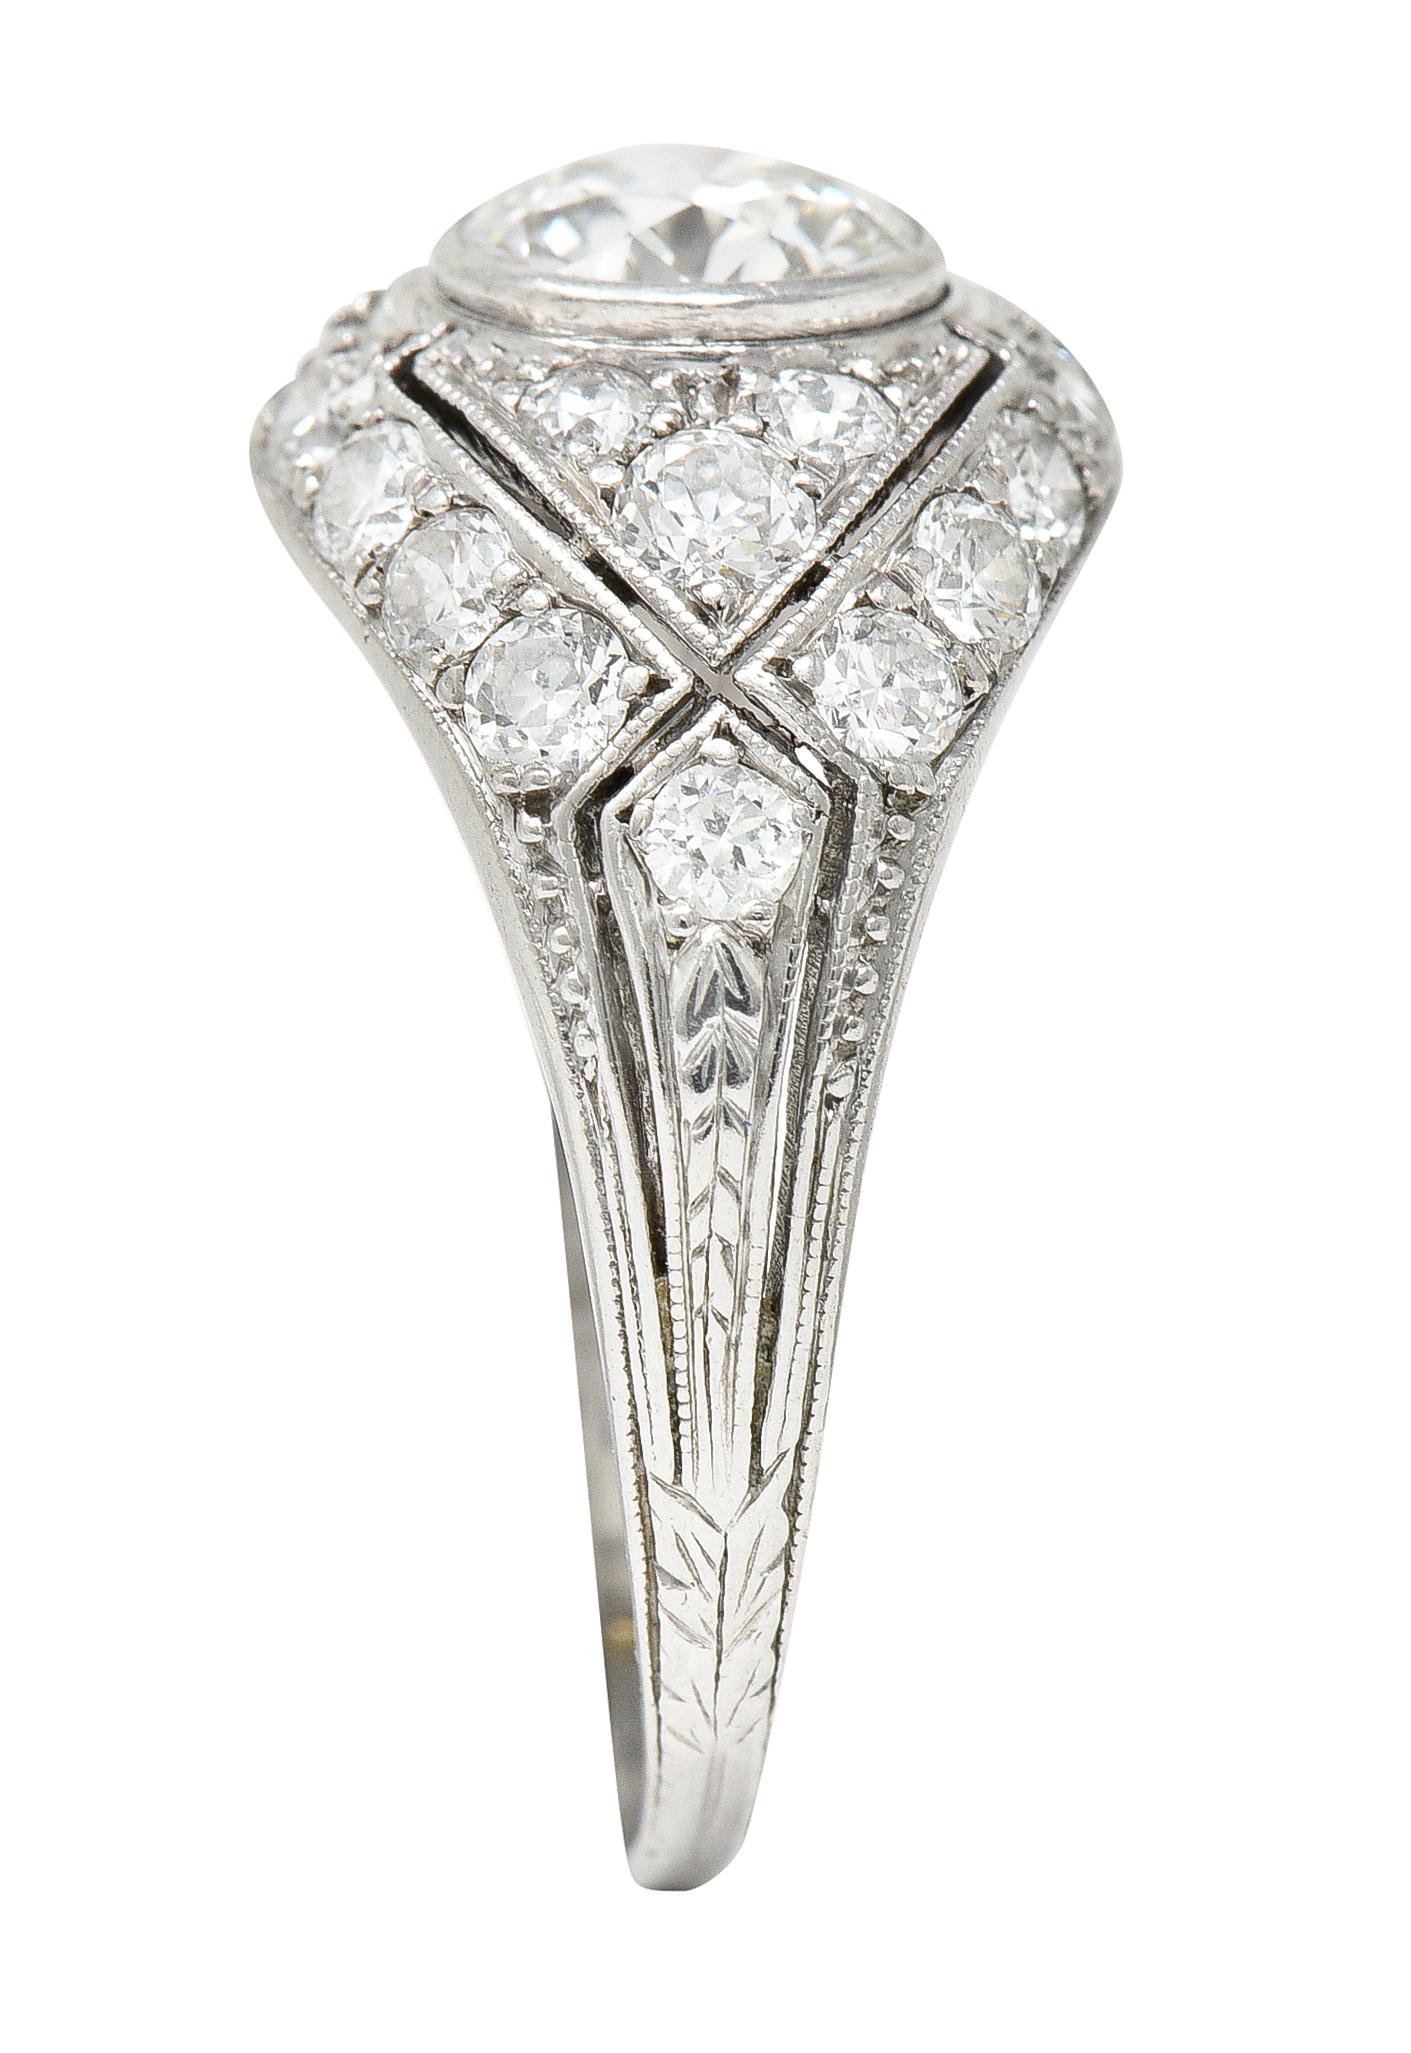 Marcus and Co. Art Deco 1.95 Carats Diamond Platinum Bombè Band Engagement Ring For Sale 1